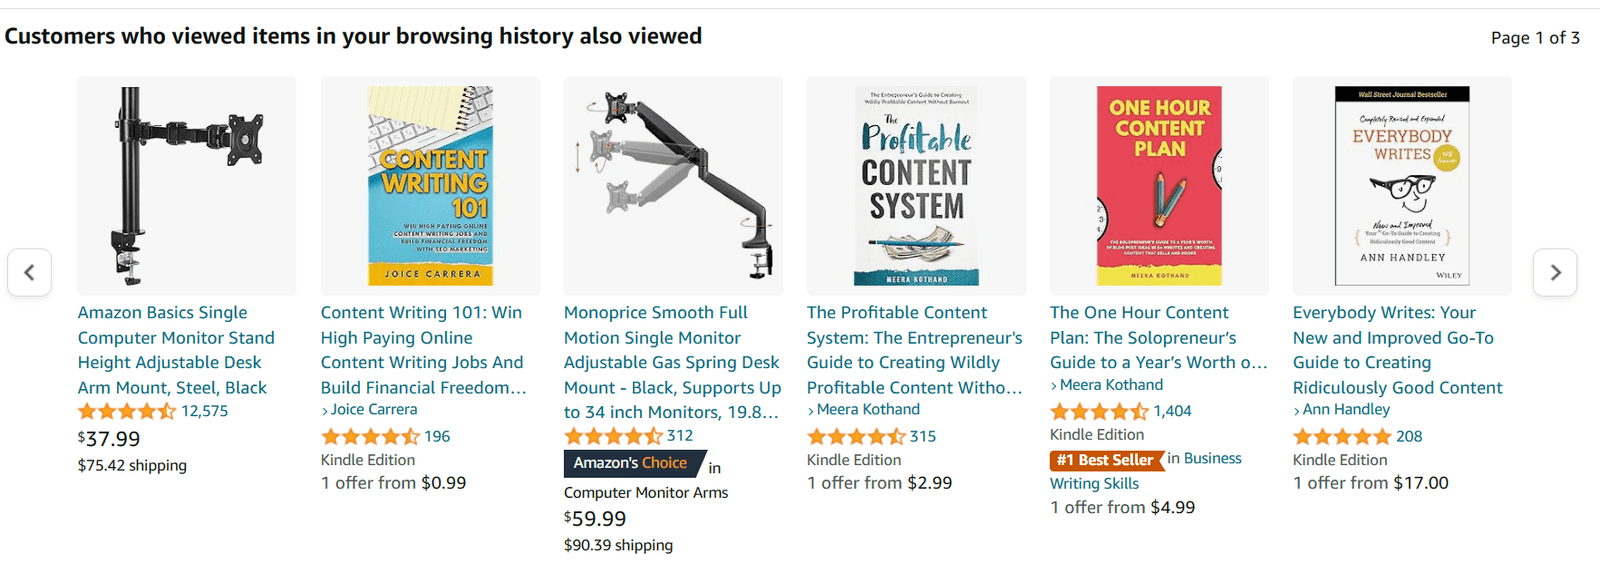 AI use case: Amazon recommends items based on browsing history. 